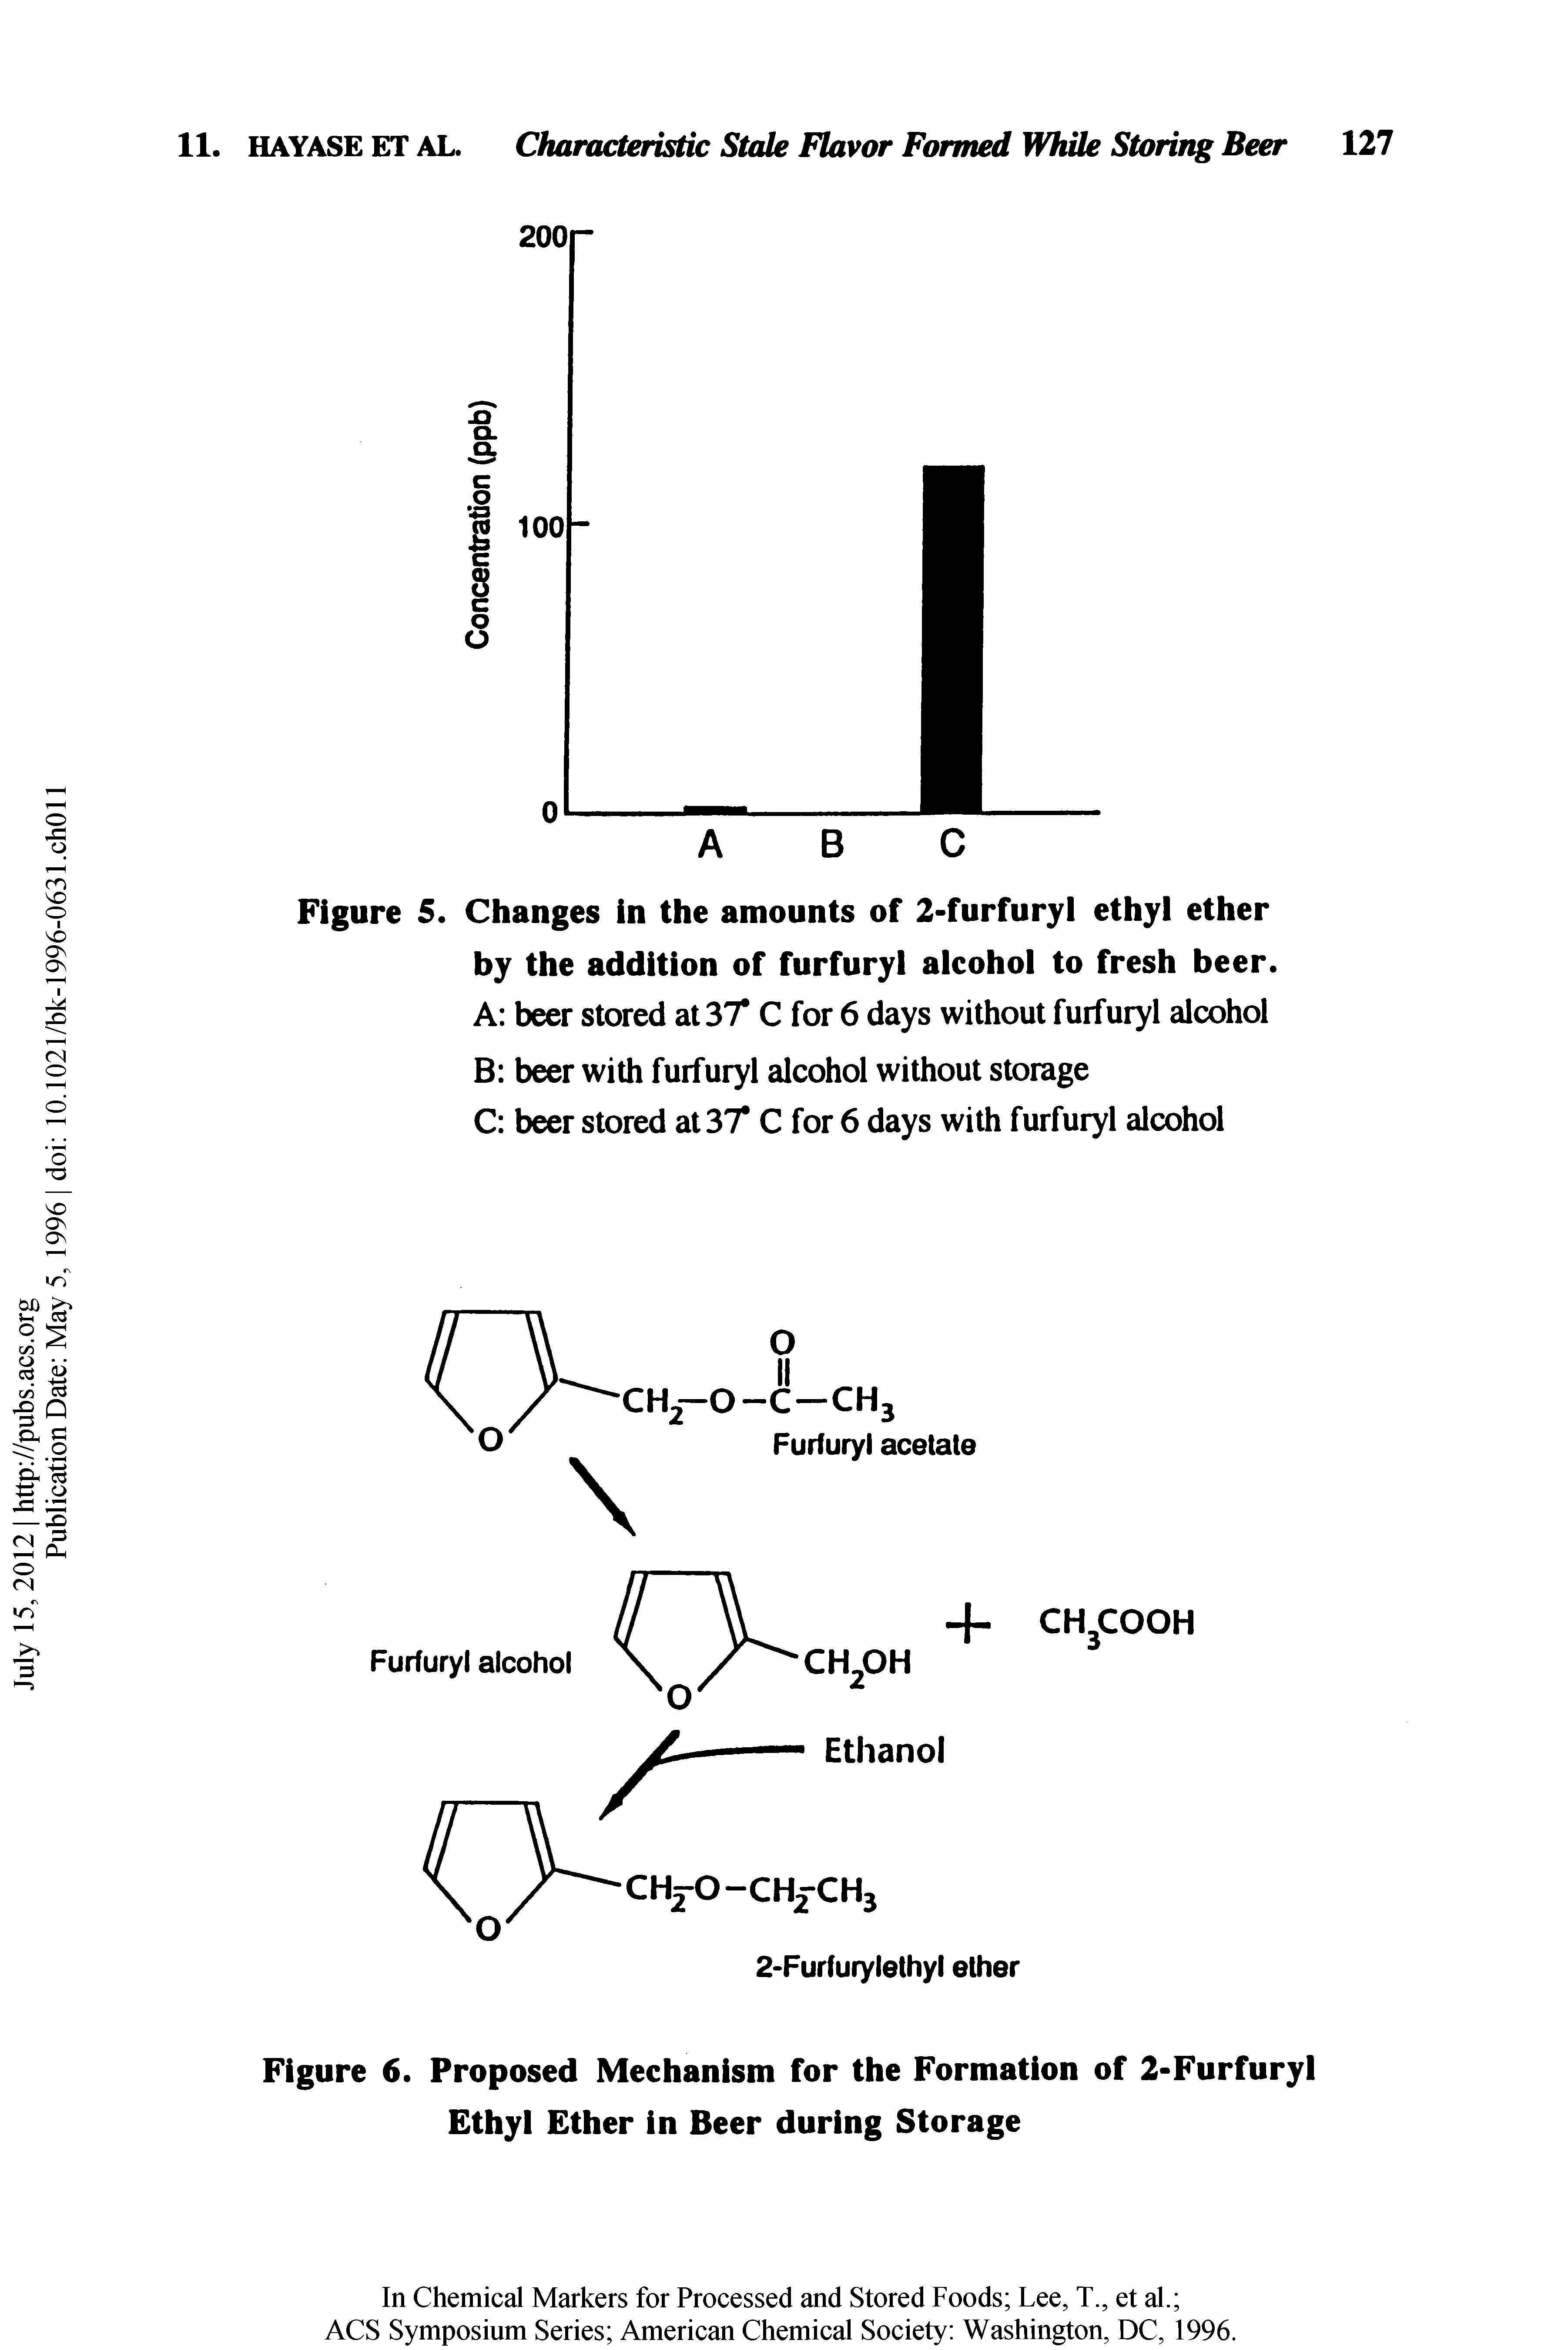 Figure 6. Proposed Mechanism for the Formation of 2-Furfuryl Ethyl Ether in Beer during Storage...